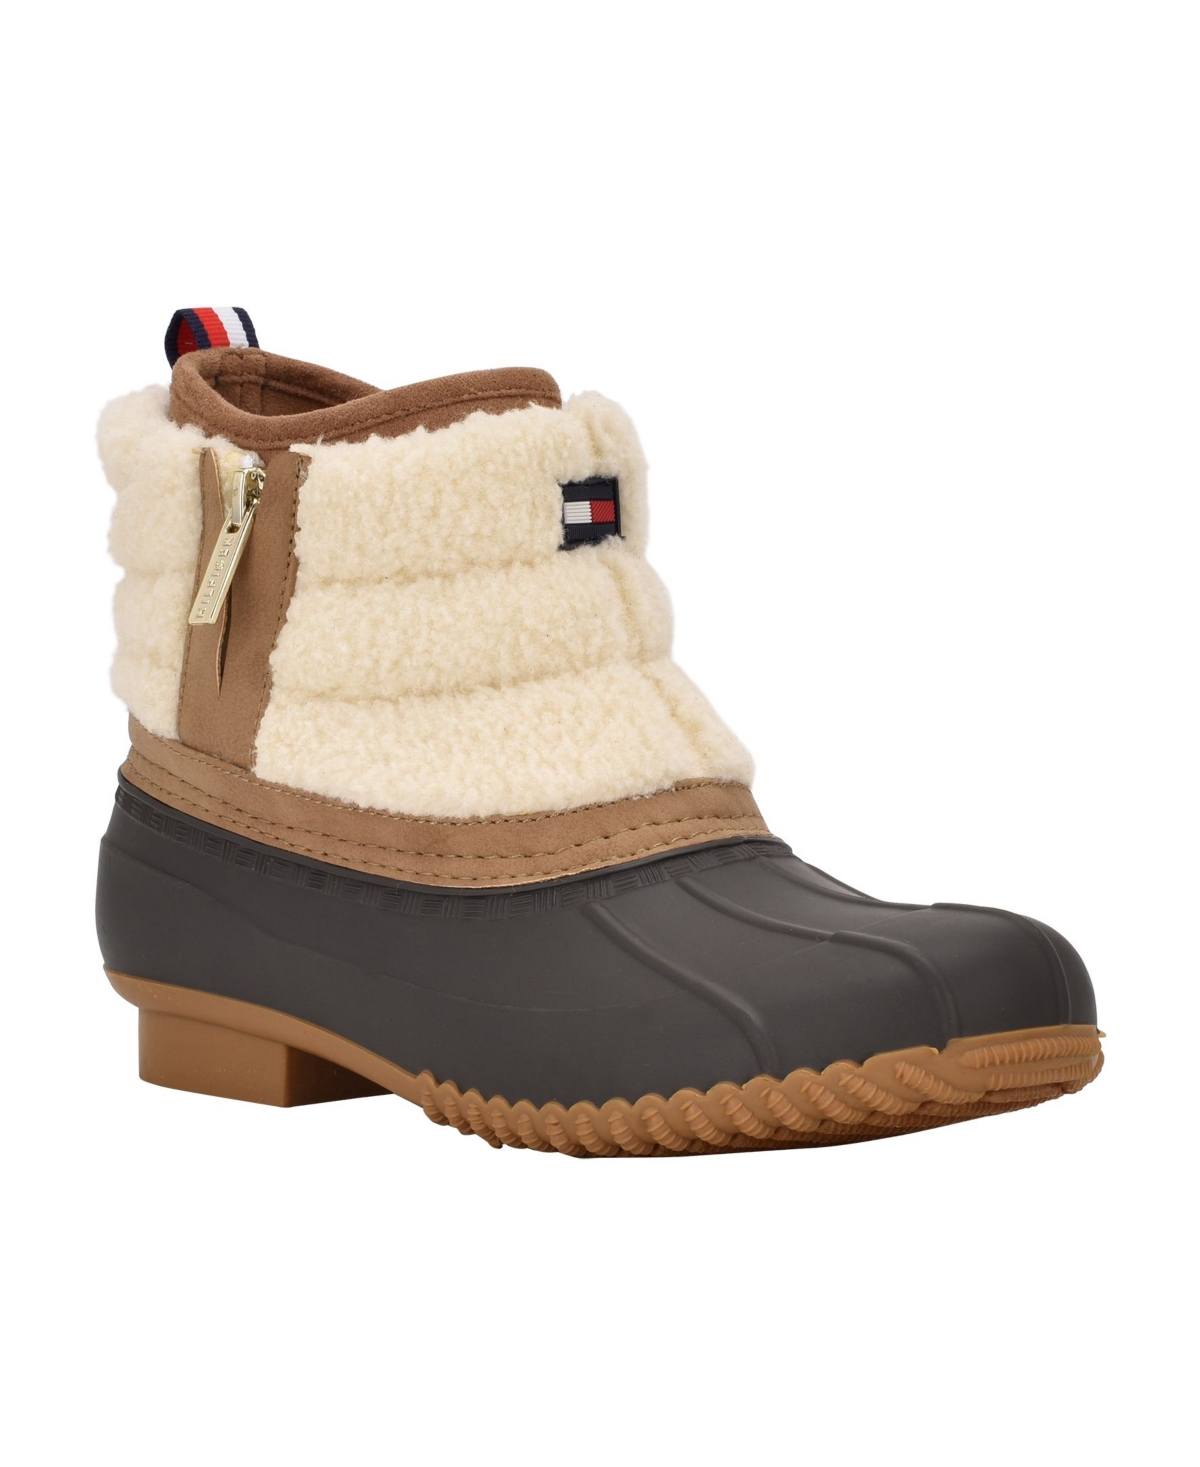 UPC 195972709867 product image for Tommy Hilfiger Women's Roana Zip Up Duck Booties Women's Shoes | upcitemdb.com